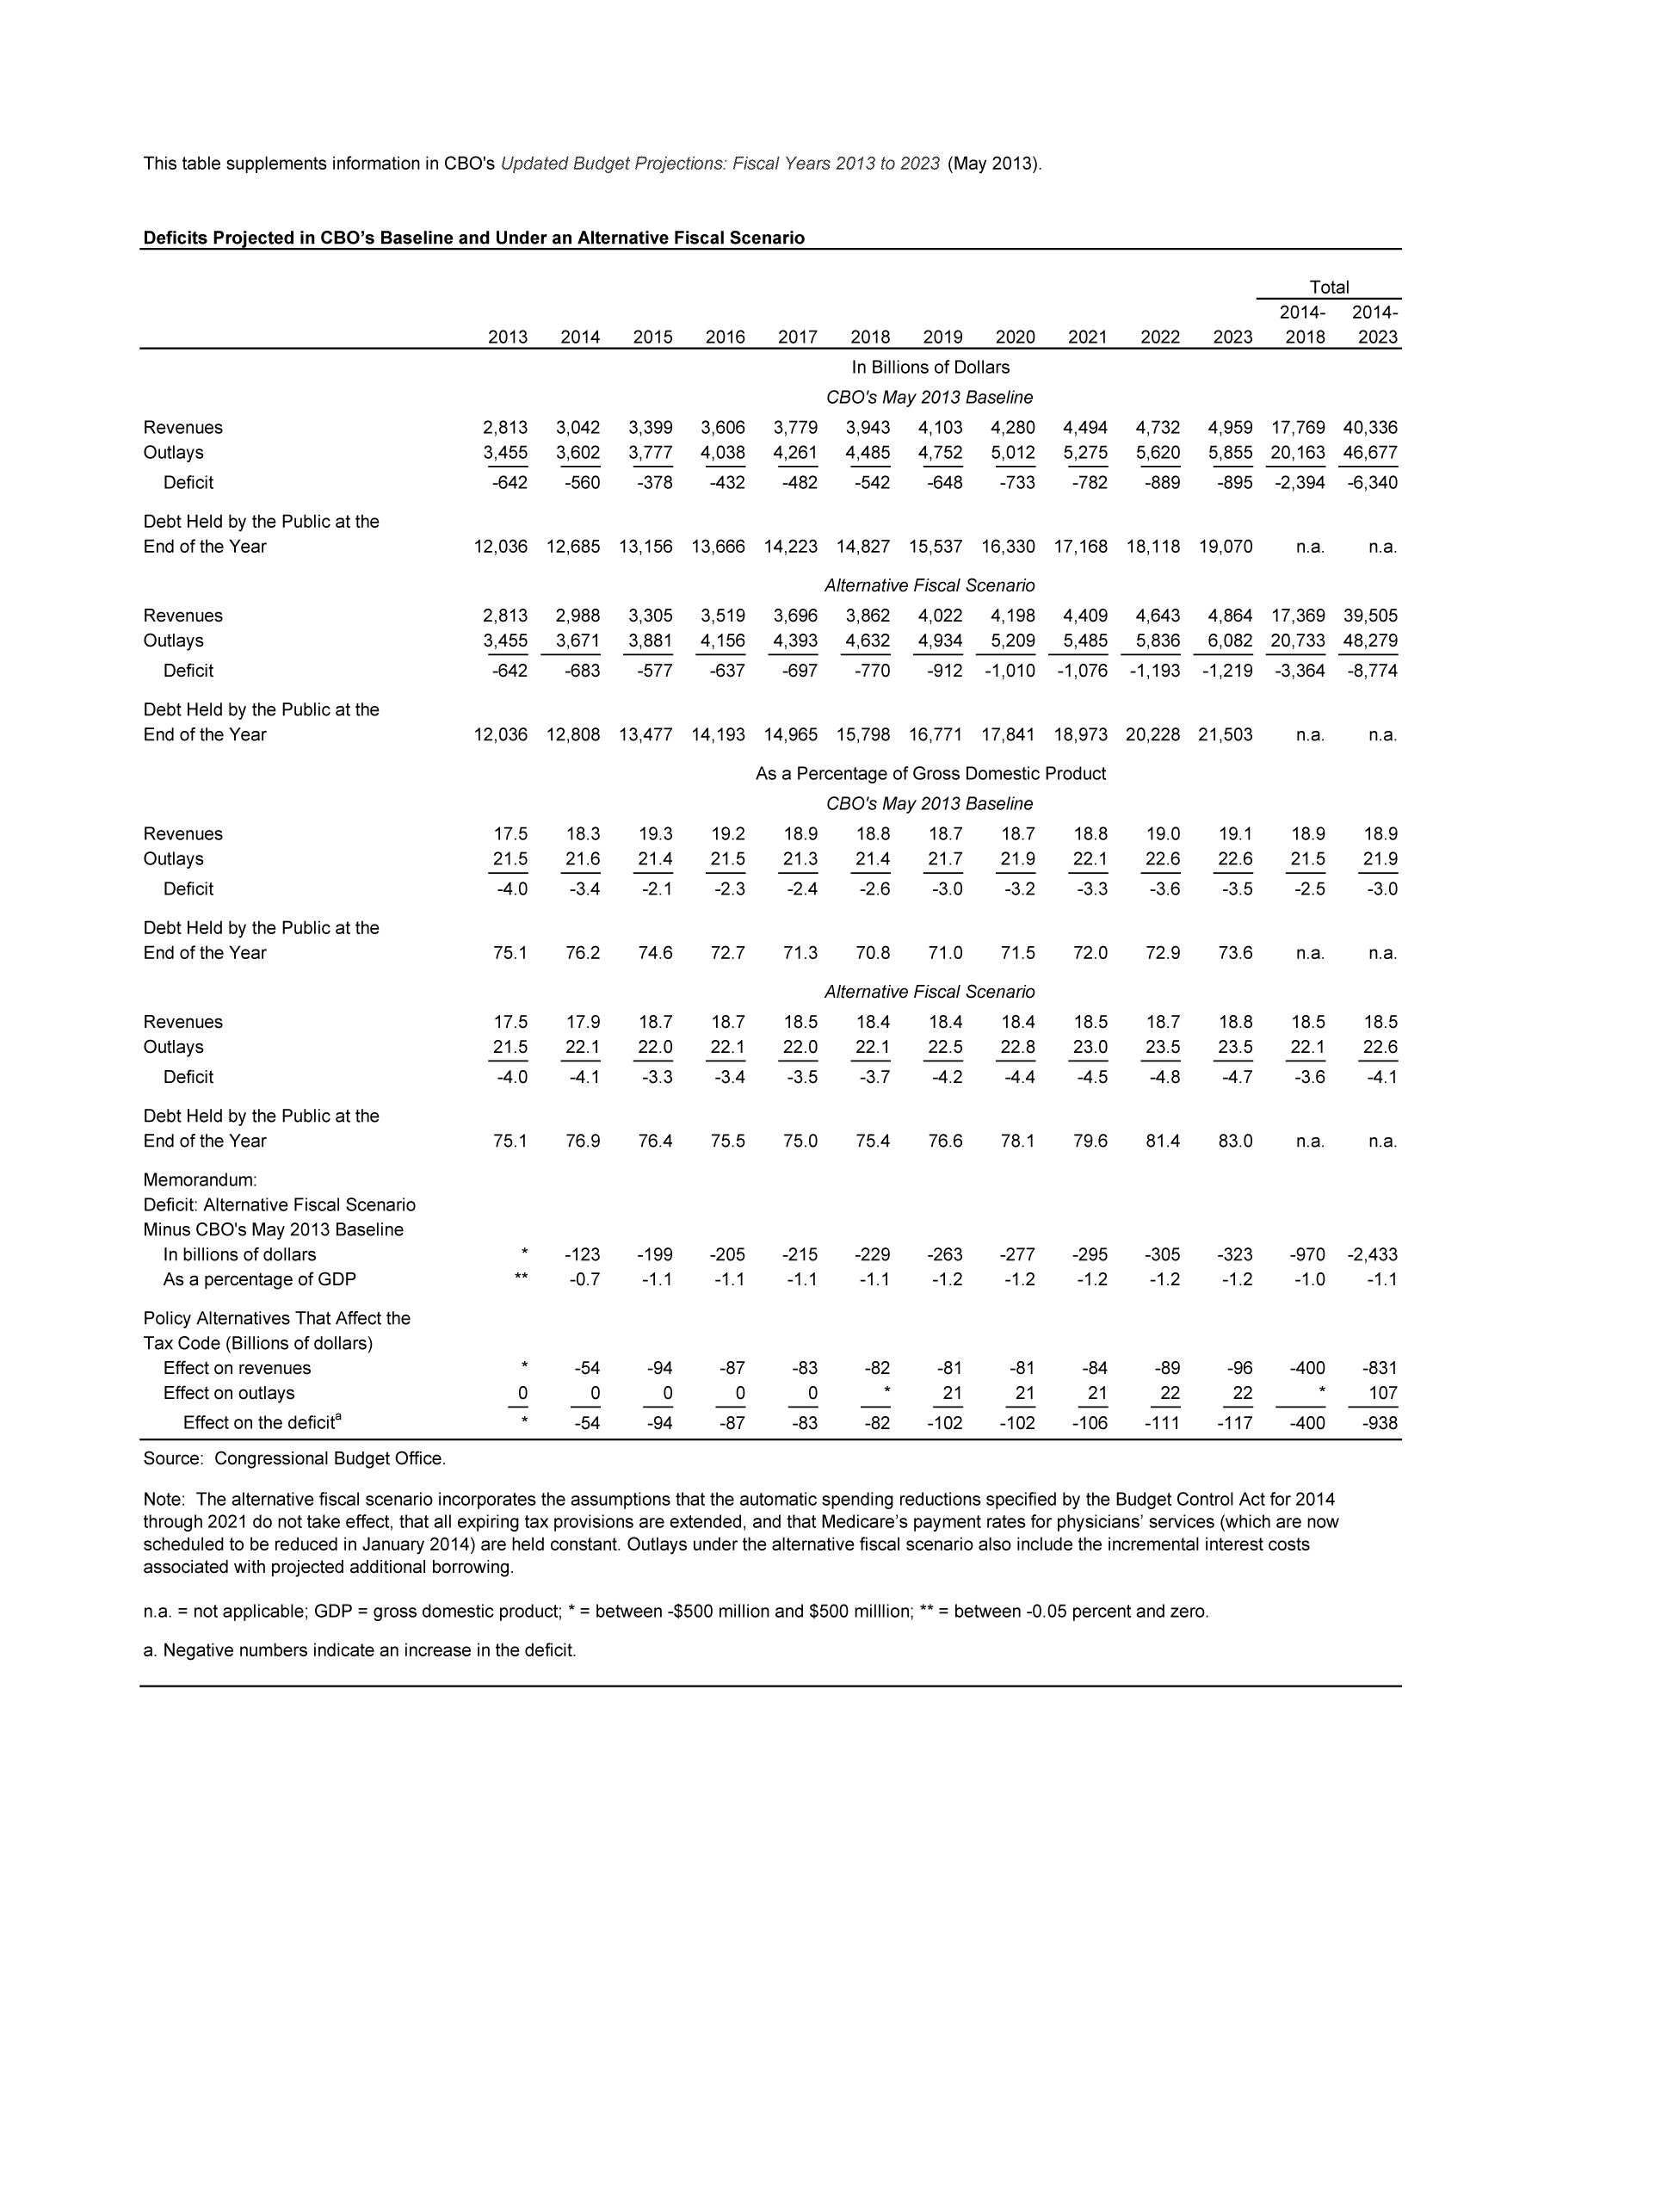 handle is hein.congrec/cbo11089 and id is 1 raw text is: This table supplements information in CBO's Updated Budget Projections- Fiscal Years 2013 to 2023 (May 2013).

Deficits Projected in CBO's Baseline and Under an Alternative Fiscal Scenario
Tota
2014-
2013   2014    2015   2016   2017    2018   2019   2020    2021   2022   2023    2018
In Billions of Dollars
CBO's May 2013 Baseline

Revenues
Outlays
Deficit

2,813
3,455
-642

3,042
3,602
-560

3,399
3,777
-378

3,606
4,038
-432

3,779
4,261
-482

3,943
4,485
-542

4,103
4,752
-648

4,280
5,012
-733

4,494
5,275
-782

4,732
5,620
-889

4,959
5,855
-895

17,769
20,163
-2,394

Debt Held by the Public at the
End of the Year

12,036 12,685

13,156  13,666  14,223  14,827  15,537  16,330  17,168  18,118  19,070

n.a.      n.a.

Alternative Fiscal Scenario

3,862
4,632
-770

4,022
4,934
-912

4,198
5,209
-1,010

Debt Held by the Public at the
End of the Year

12,036  12,808  13,477  14,193  14,965  15,798  16,771  17,841  18,973

20,228 21,503

n.a.      n.a.

As a Percentage of Gross Domestic Product
CBO's May 2013 Baseline

18.9
21.3
-2.4

18.8
21.4
-2.6

18.7
21.7
-3.0

18.7
21.9
-3.2

18.8
22.1
-3.3

Debt Held by the Public at the
End of the Year

75.1   76.2    74.6   72.7    71.3   70.8   71.0    71.5   72.0   72.9    73.6    n.a.   n.a.

Alternative Fiscal Scenario

Revenues
Outlays
Deficit

17.5
21.5
-4.0

17.9
22.1
-4.1

18.7
22.0
-3.3

18.7
22.1
-3.4

18.5
22.0
-3.5

18.4
22.1
-3.7

18.4
22.5
-4.2

18.4
22.8
-4.4

18.5
23.0
-4.5

18.7
23.5
-4.8

18.8
23.5
-4.7

18.5
22.1
-3.6

18.5
22.6
-4.1

Debt Held by the Public at the
End of the Year
Memorandum:
Deficit: Alternative Fiscal Scenario
Minus CBO's May 2013 Baseline
In billions of dollars
As a percentage of GDP
Policy Alternatives That Affect the
Tax Code (Billions of dollars)
Effect on revenues
Effect on outlays
Effect on the deficita

75.1   76.9   76.4   75.5   75.0   75.4   76.6   78.1    79.6   81.4   83.0    n.a.   n.a.

0
*

-123     -199     -205     -215    -229     -263     -277     -295     -305     -323     -970   -2,433
-0.7     -1.1     -1.1     -1.1     -1.1    -1.2     -1.2     -1.2     -1.2     -1.2     -1.0     -1.1

-54
0
-54

-94
0
-94

-87
0
-87

-83
0
-83

-82
-82

-81
21
-102

-81
21
-102

-84
21
-106

-89
22
-111

-96
22
-117

-400
-400

-831
107
-938

Source: Congressional Budget Office.
Note: The alternative fiscal scenario incorporates the assumptions that the automatic spending reductions specified by the Budget Control Act for 2014
through 2021 do not take effect, that all expiring tax provisions are extended, and that Medicare's payment rates for physicians' services (which are now
scheduled to be reduced in January 2014) are held constant. Outlays under the alternative fiscal scenario also include the incremental interest costs
associated with projected additional borrowing.
n.a. = not applicable; GDP = gross domestic product; * = between -$500 million and $500 milllion; ** = between -0.05 percent and zero.

a. Negative numbers indicate an increase in the deficit.

Revenues
Outlays
Deficit

2014-
2023

40,336
46,677
-6,340

2,813
3,455
-642

2,988
3,671
-683

3,305
3,881
-577

3,519
4,156
-637

3,696
4,393
-697

Revenues
Outlays
Deficit

4,409
5,485
-1,076

4,643
5,836
-1,193

4,864
6,082
-1,219

17,369
20,733
-3,364

39,505
48,279
-8,774

17.5
21.5
-4.0

18.3
21.6
-3.4

19.3
21.4
-2.1

19.2
21.5
-2.3

19.0
22.6
-3.6

19.1
22.6
-3.5

18.9
21.5
-2.5

18.9
21.9
-3.0


